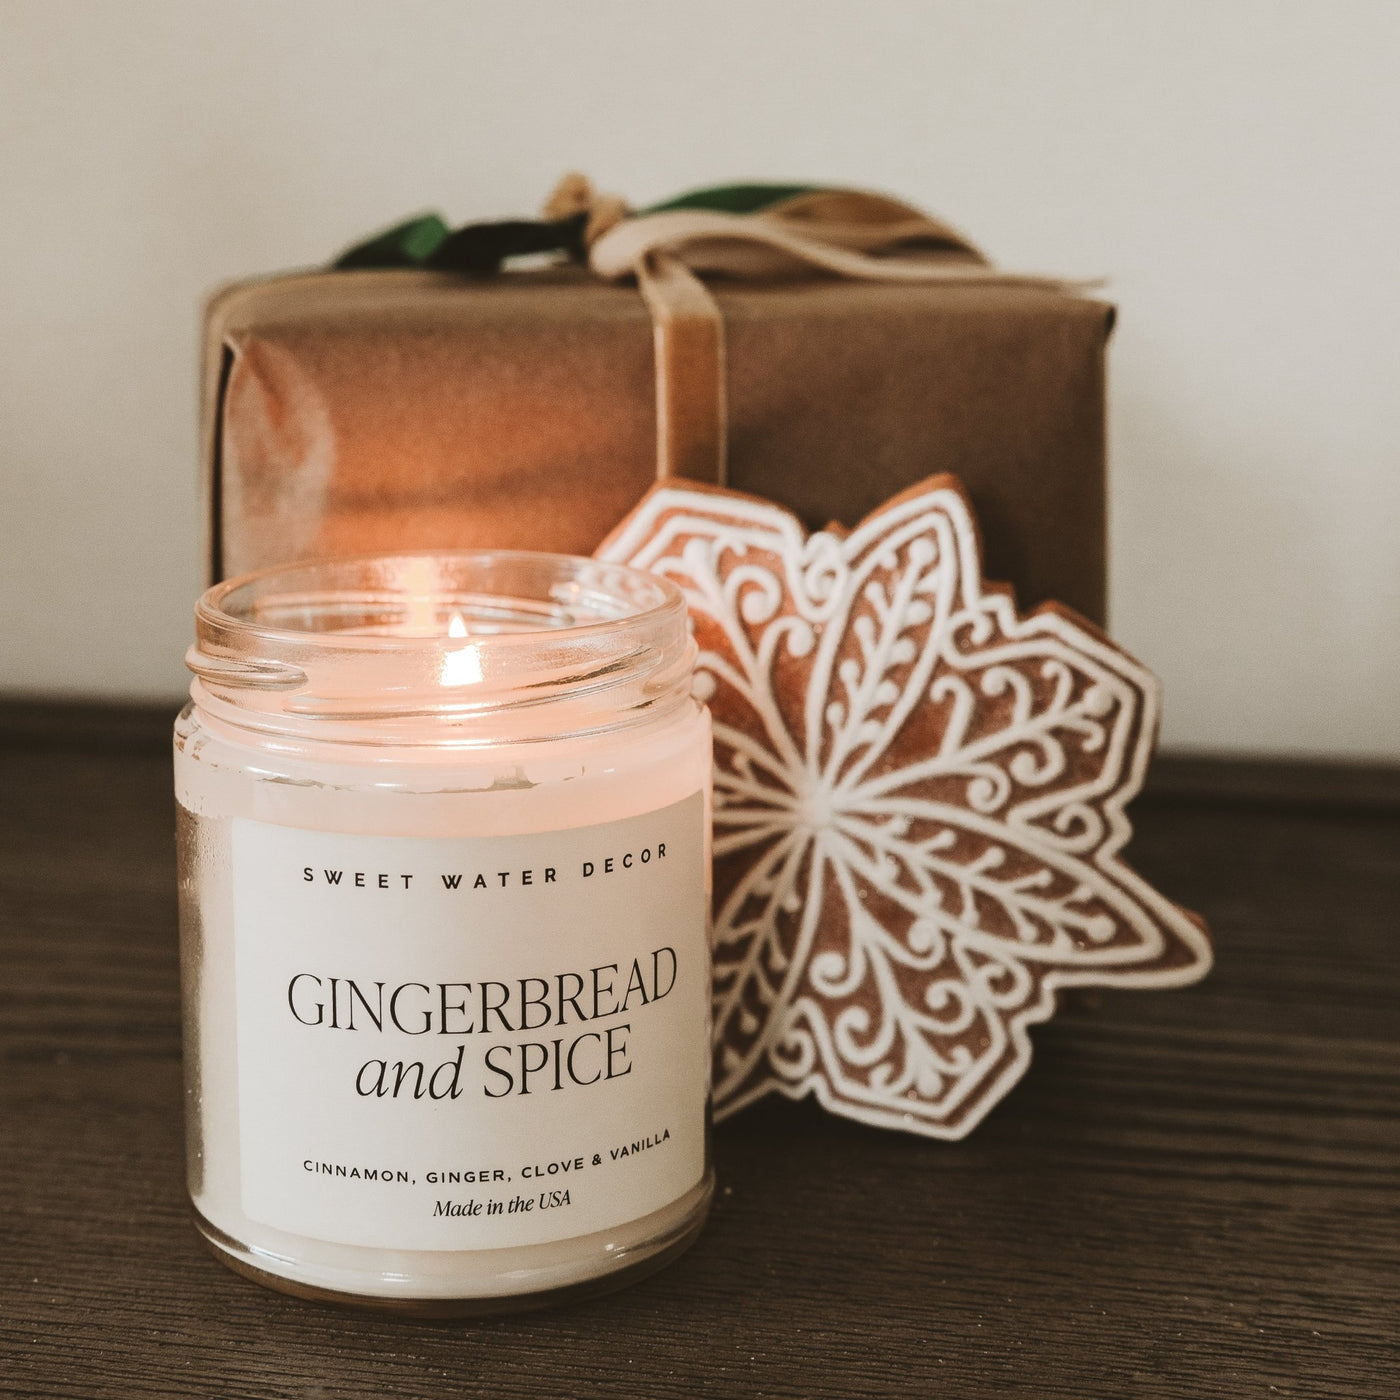 Gingerbread and Spice Soy Candle - Clear Jar - 9 oz - Sweet Water Decor - Candles